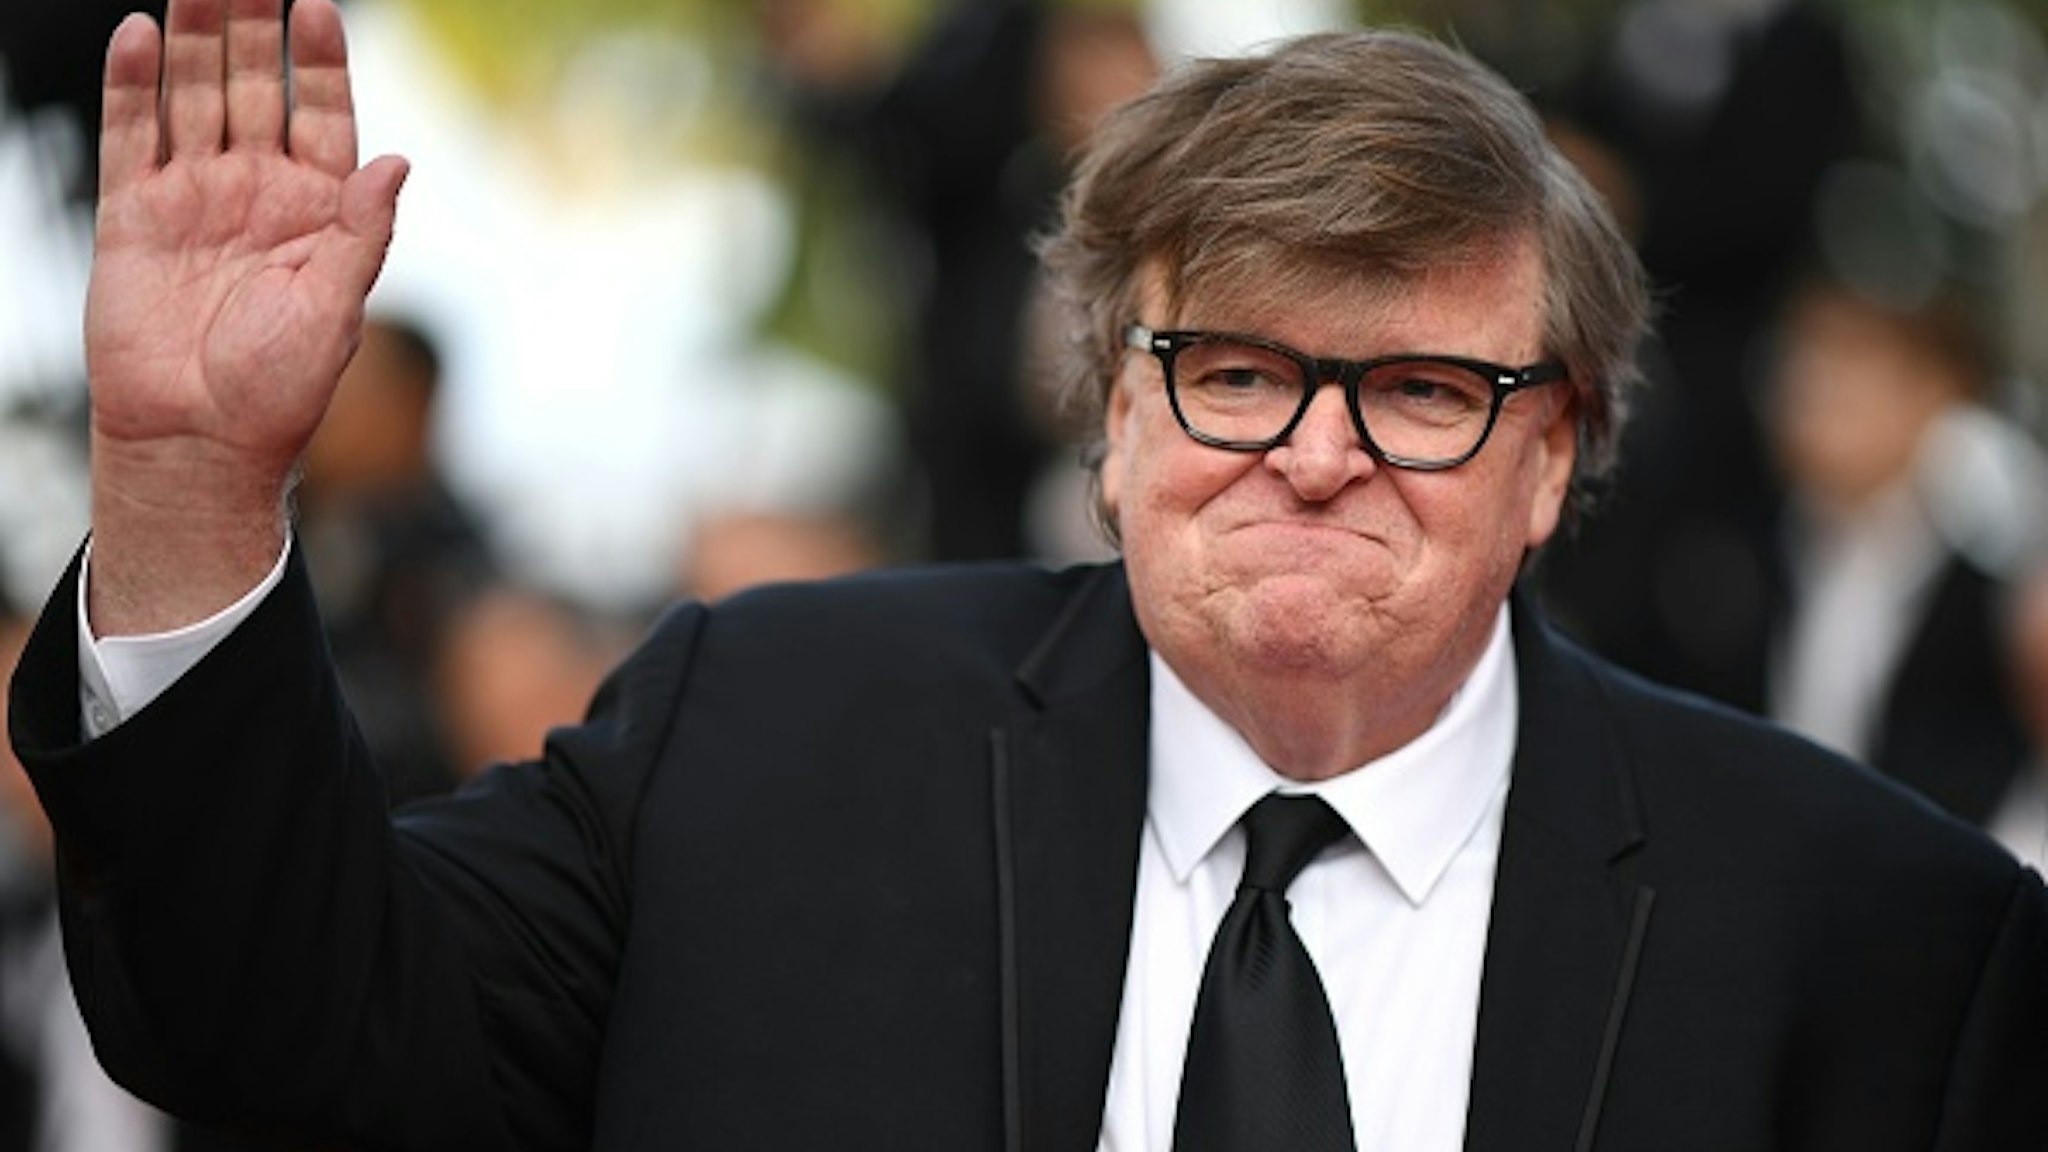 US director Michael Moore waves as he arrives for the screening of the film "The Specials (Hors Normes)" at the 72nd edition of the Cannes Film Festival in Cannes, southern France, on May 25, 2019.